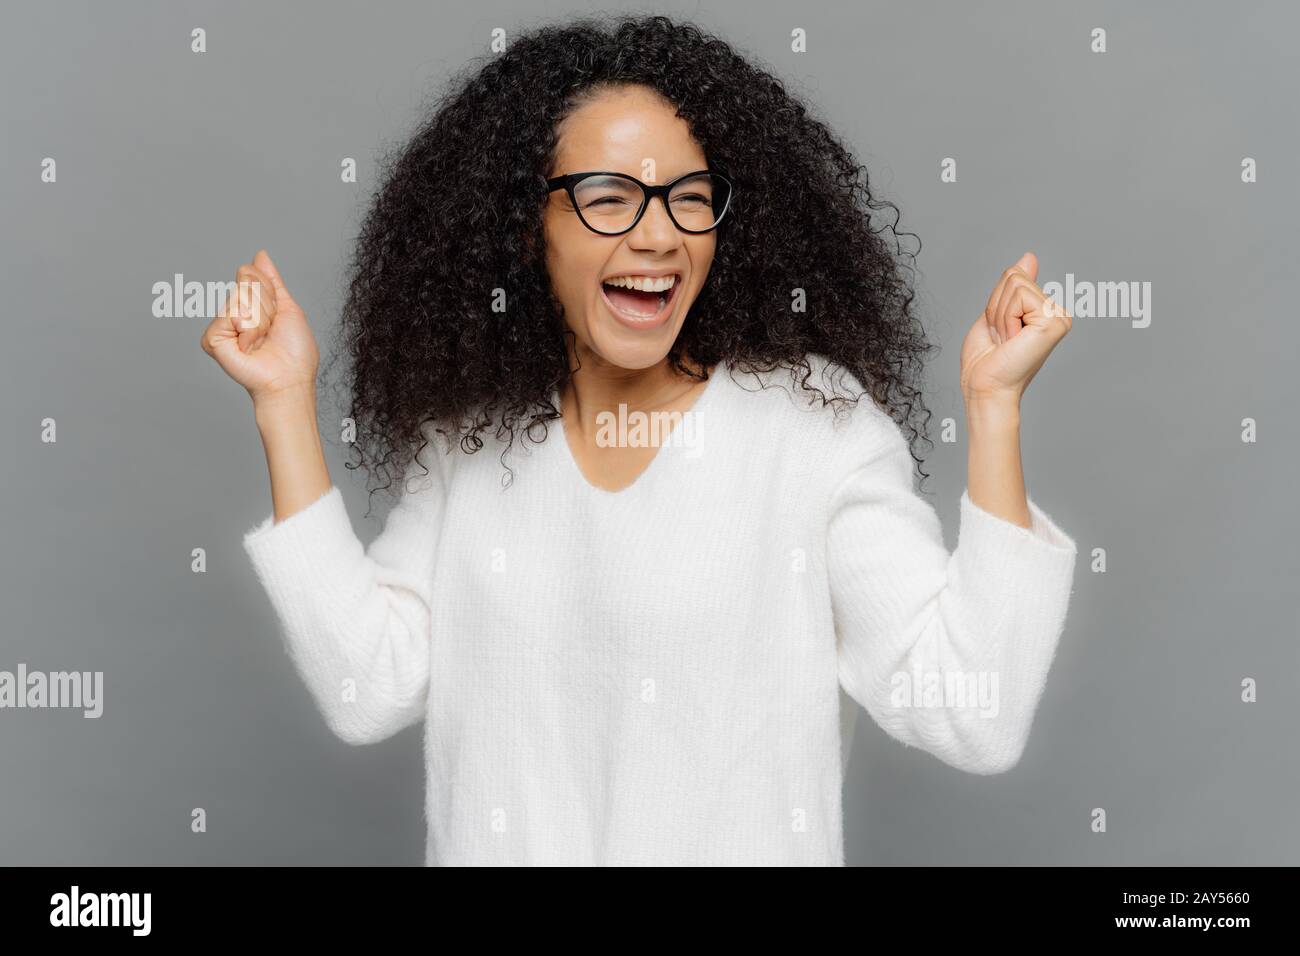 Studio shot of triumphing dark skinned woman clenches fists, smiles happily, celebrates success, achieves goal, smiles broadly, dressed casually, isol Stock Photo